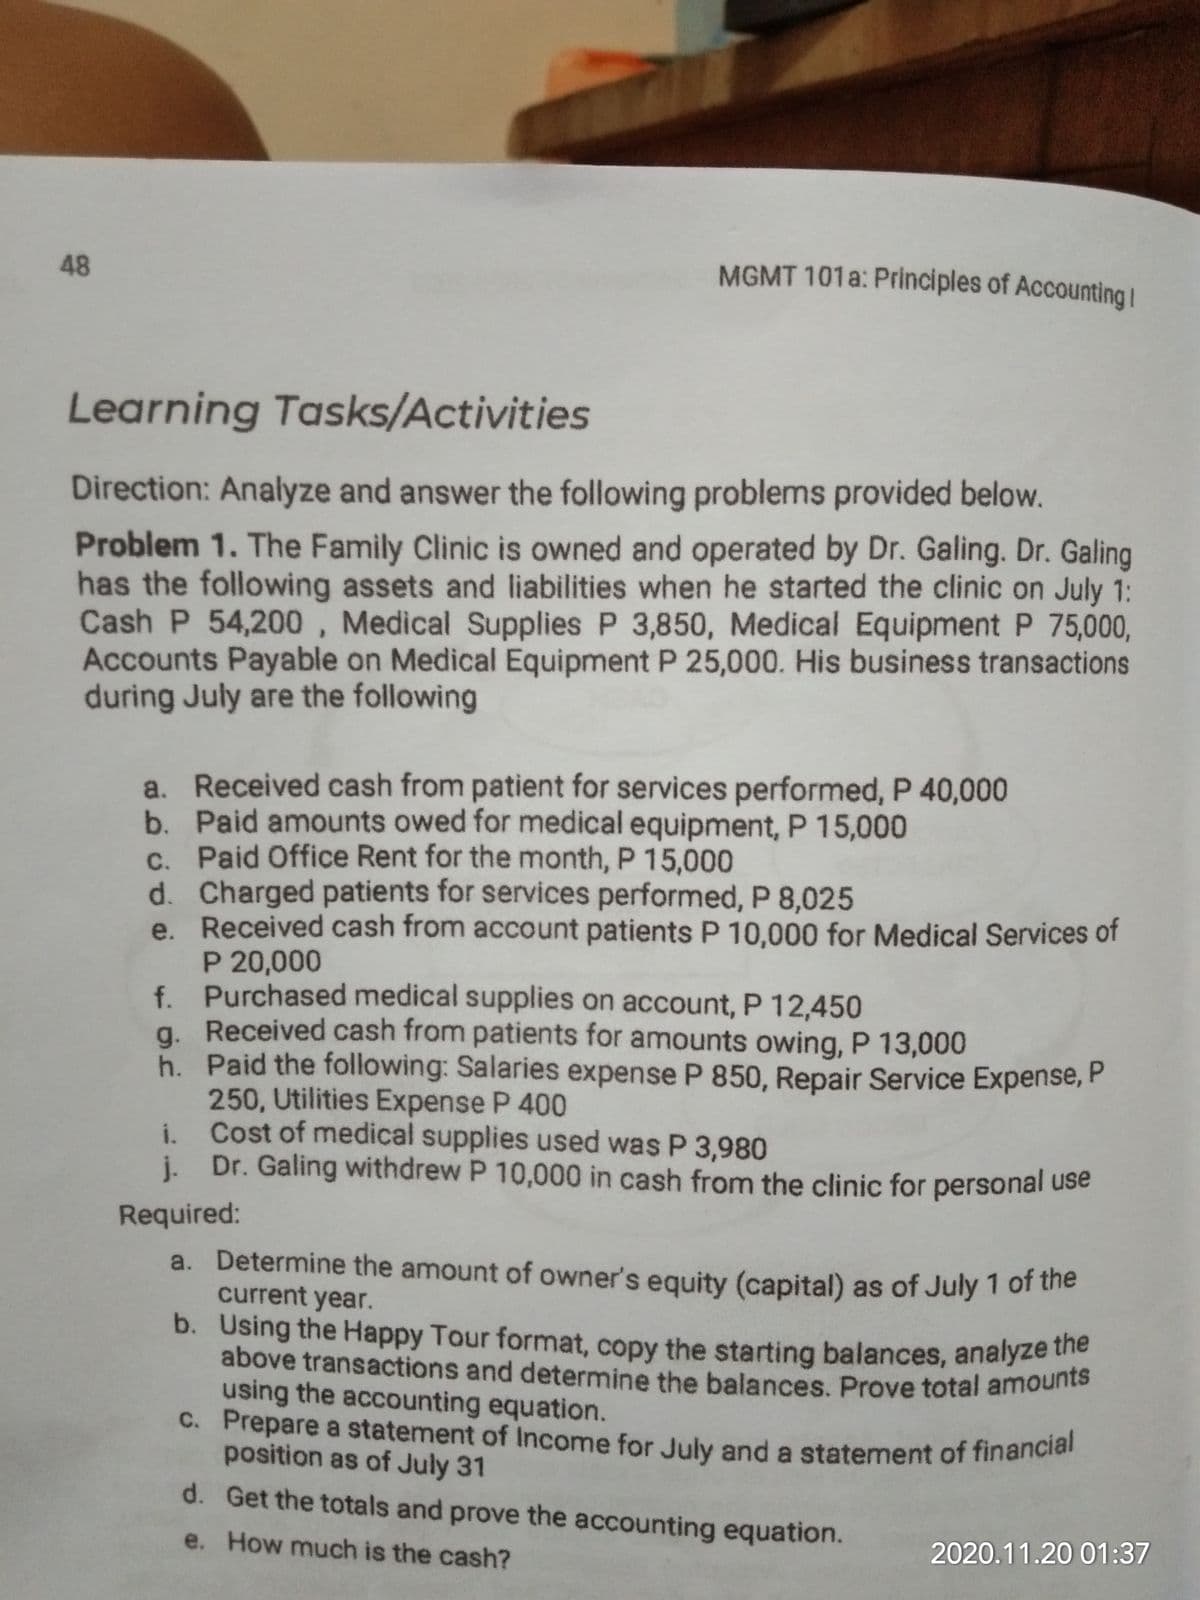 above transactions and determine the balances. Prove total amounts
c. Prepare a statement of Income for July and a statement of financial
48
MGMT 101a: Principles of Accounting I
Learning Tasks/Activities
Direction: Analyze and answer the following problems provided below.
Problem 1. The Family Clinic is owned and operated by Dr. Galing. Dr. Galing
has the following assets and liabilities when he started the clinic on July 1:
Cash P 54,200 , Medical Supplies P 3,850, Medical Equipment P 75,000,
Accounts Payable on Medical Equipment P 25,000. His business transactions
during July are the following
a. Received cash from patient for services performed, P 40,000
b. Paid amounts owed for medical equipment, P 15,000
C. Paid Office Rent for the month, P 15,000
d. Charged patients for services performed, P 8,025
e. Received cash from account patients P 10,000 for Medical Services of
P 20,000
f. Purchased medical supplies on account, P 12,450
a. Received cash from patients for amounts owing, P 13,000
h. Paid the following: Salaries expense P 850, Repair Service Expense, P
250, Utilities Expense P 400
Cost of medical supplies used was P 3,980
Dr. Galing withdrew P 10,000 in cash from the clinic for personal use
i.
j.
Required:
a. Determine the amount of owner's equity (capital) as of July 1 of the
current year.
b. Using the Happy Tour format, copy the starting balances, analyze e
using the accounting equation.
position as of July 31
d. Get the totals and prove the accounting equation.
e. How much is the cash?
2020.11.20 01:37
